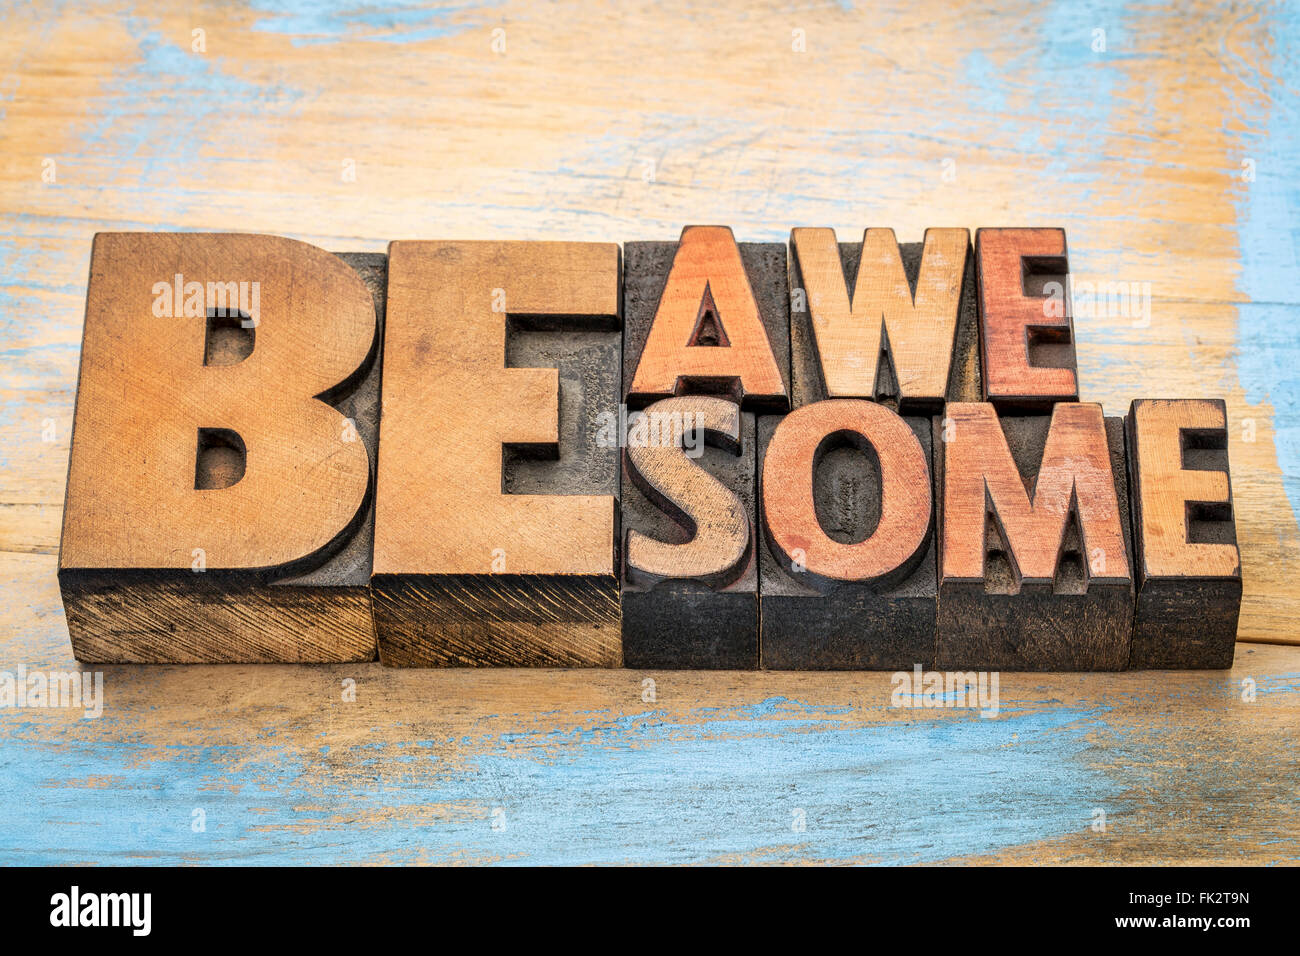 be awesome words in vintage letterpress wood type blocks against grunge painted wood Stock Photo